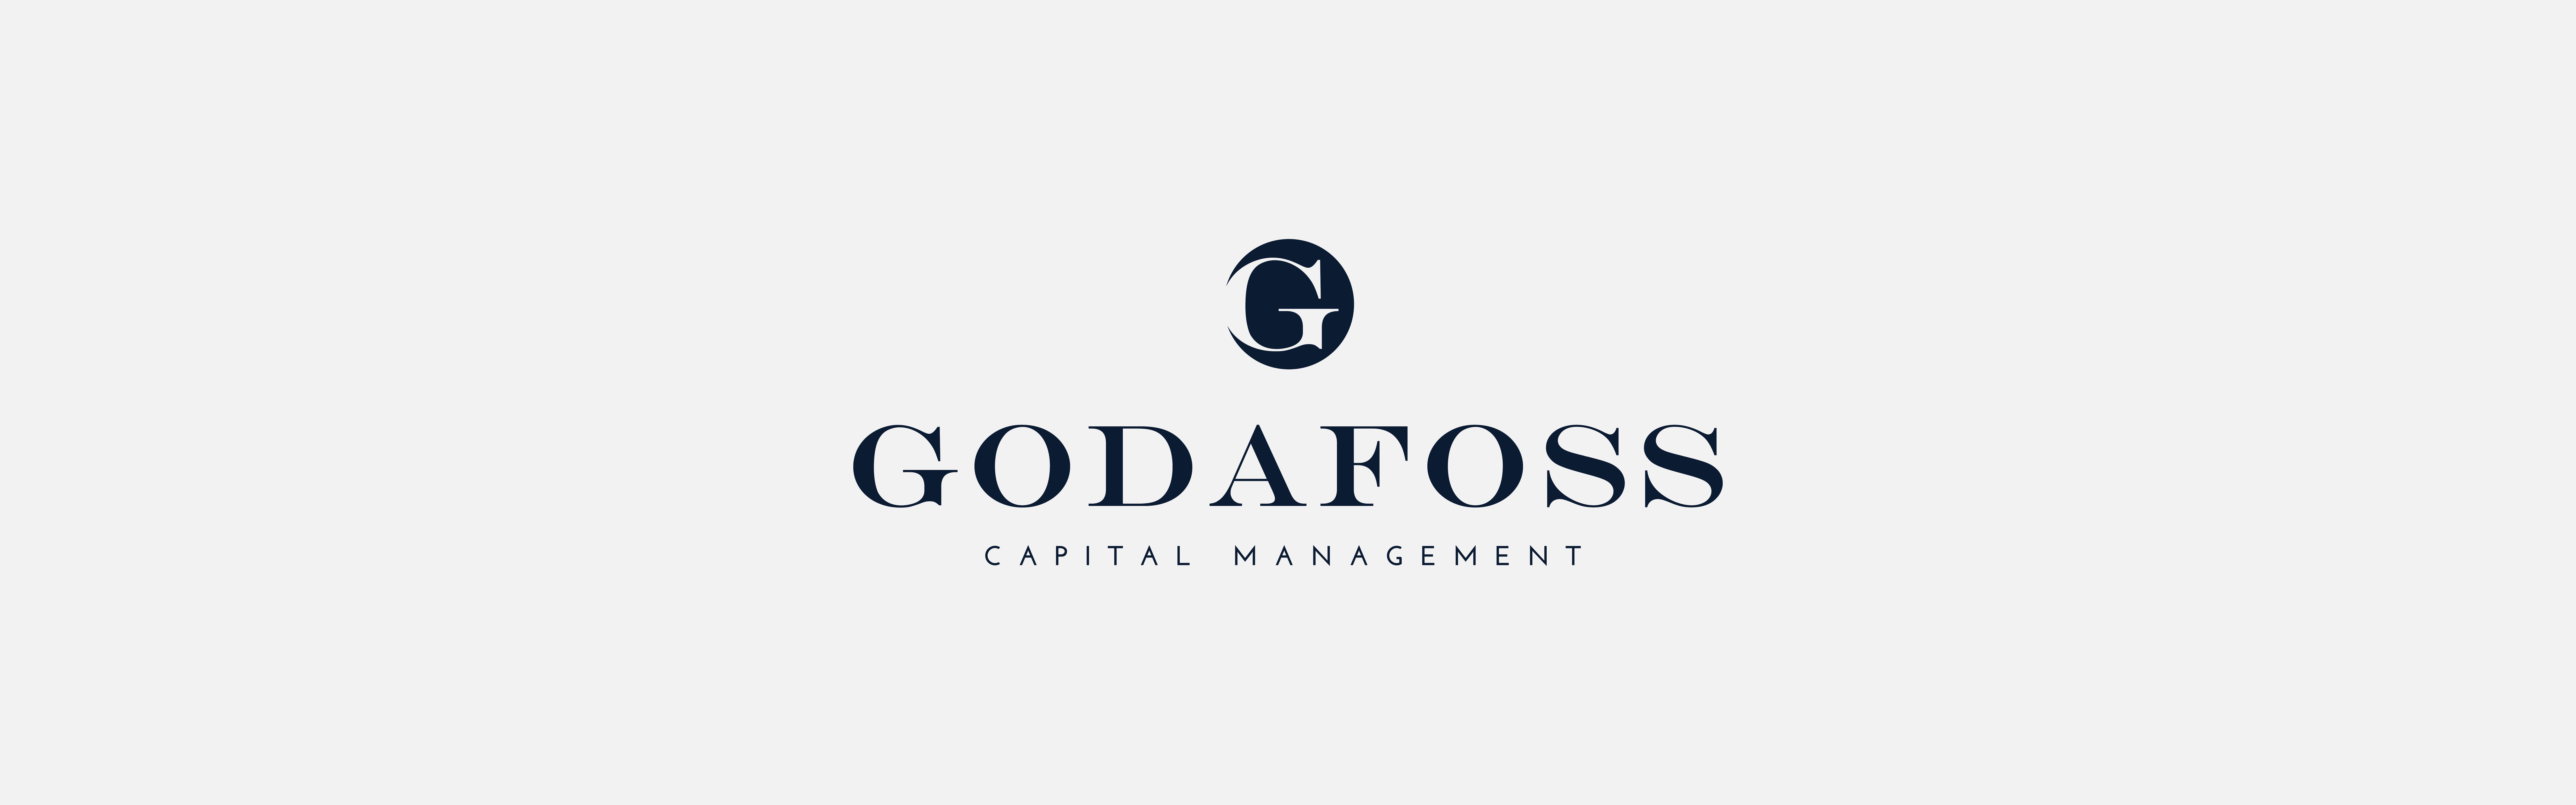 Logo of Godafoss Capital Management featuring a stylized 'g' emblem above the company name written in a serif font, set against a plain background.